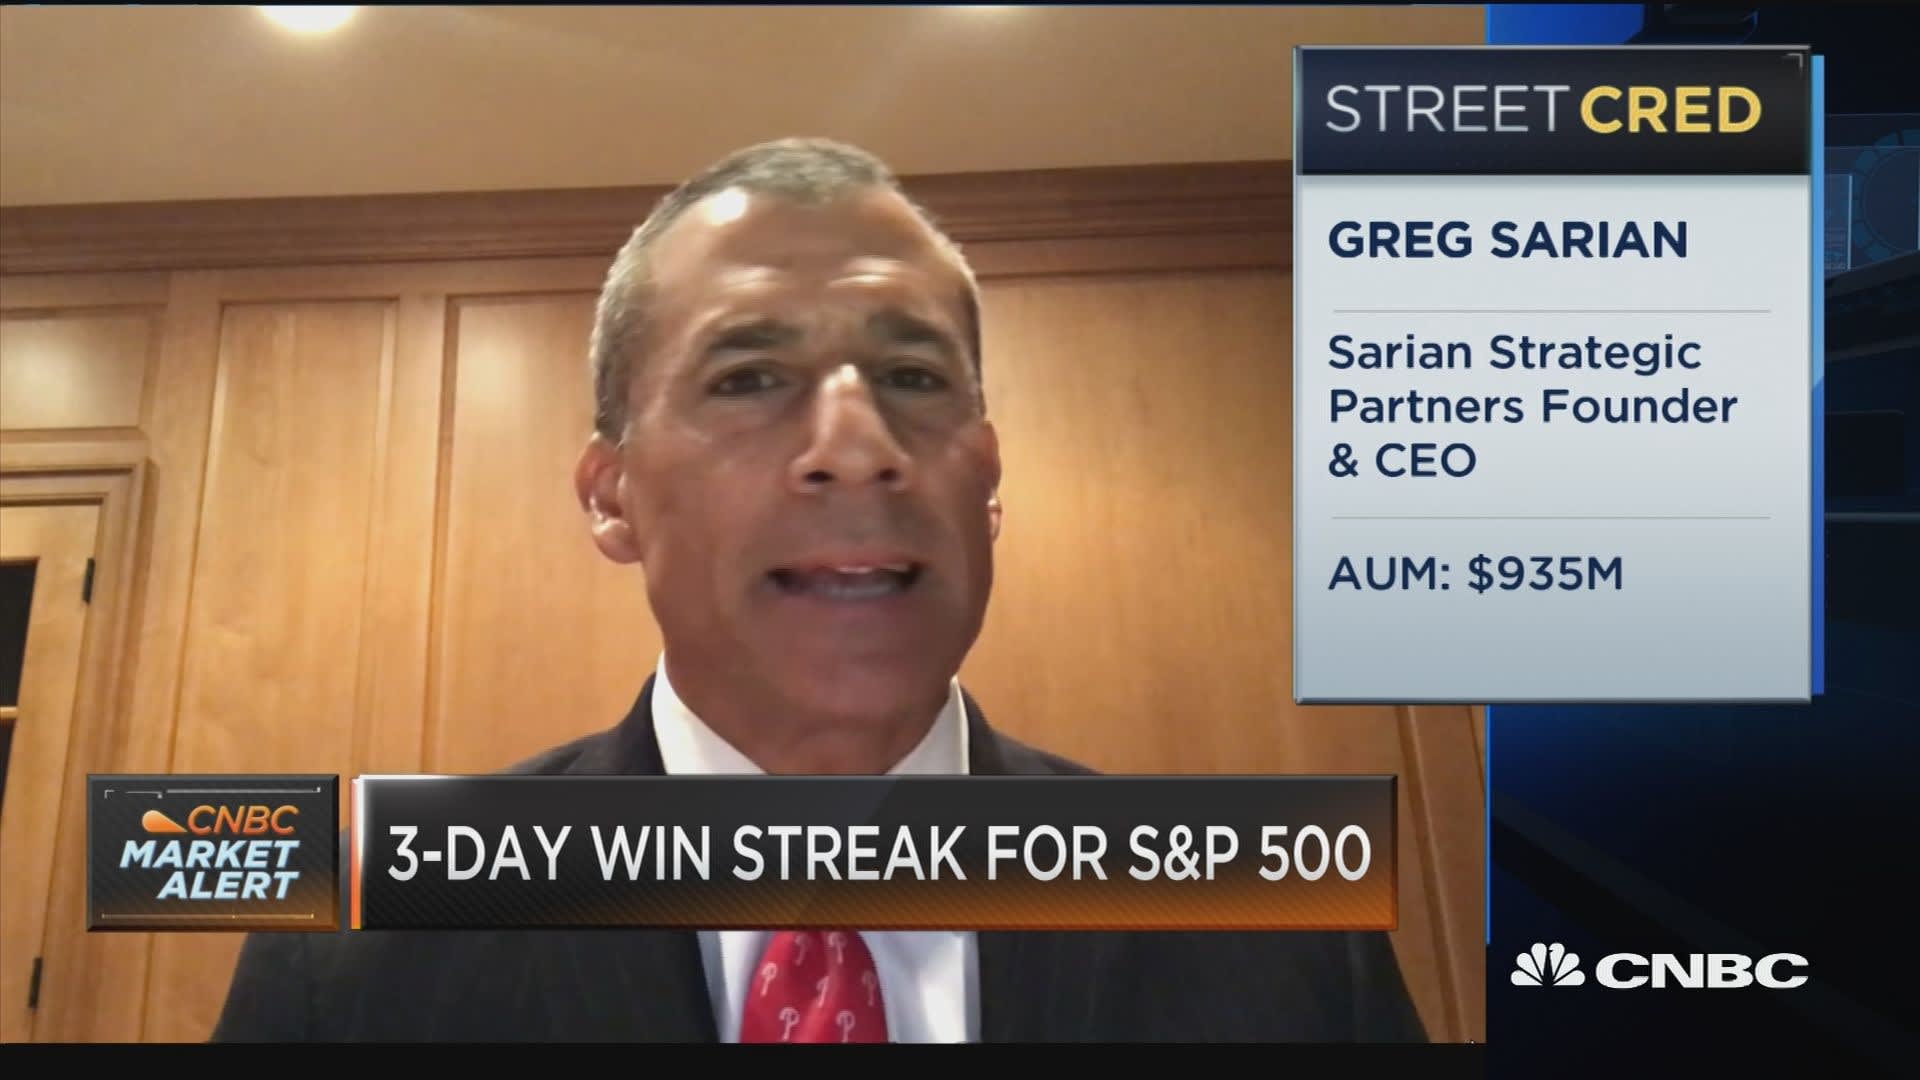 Sarian: It’s really important for investors right now to be pro-active (Jul 22, 2020)